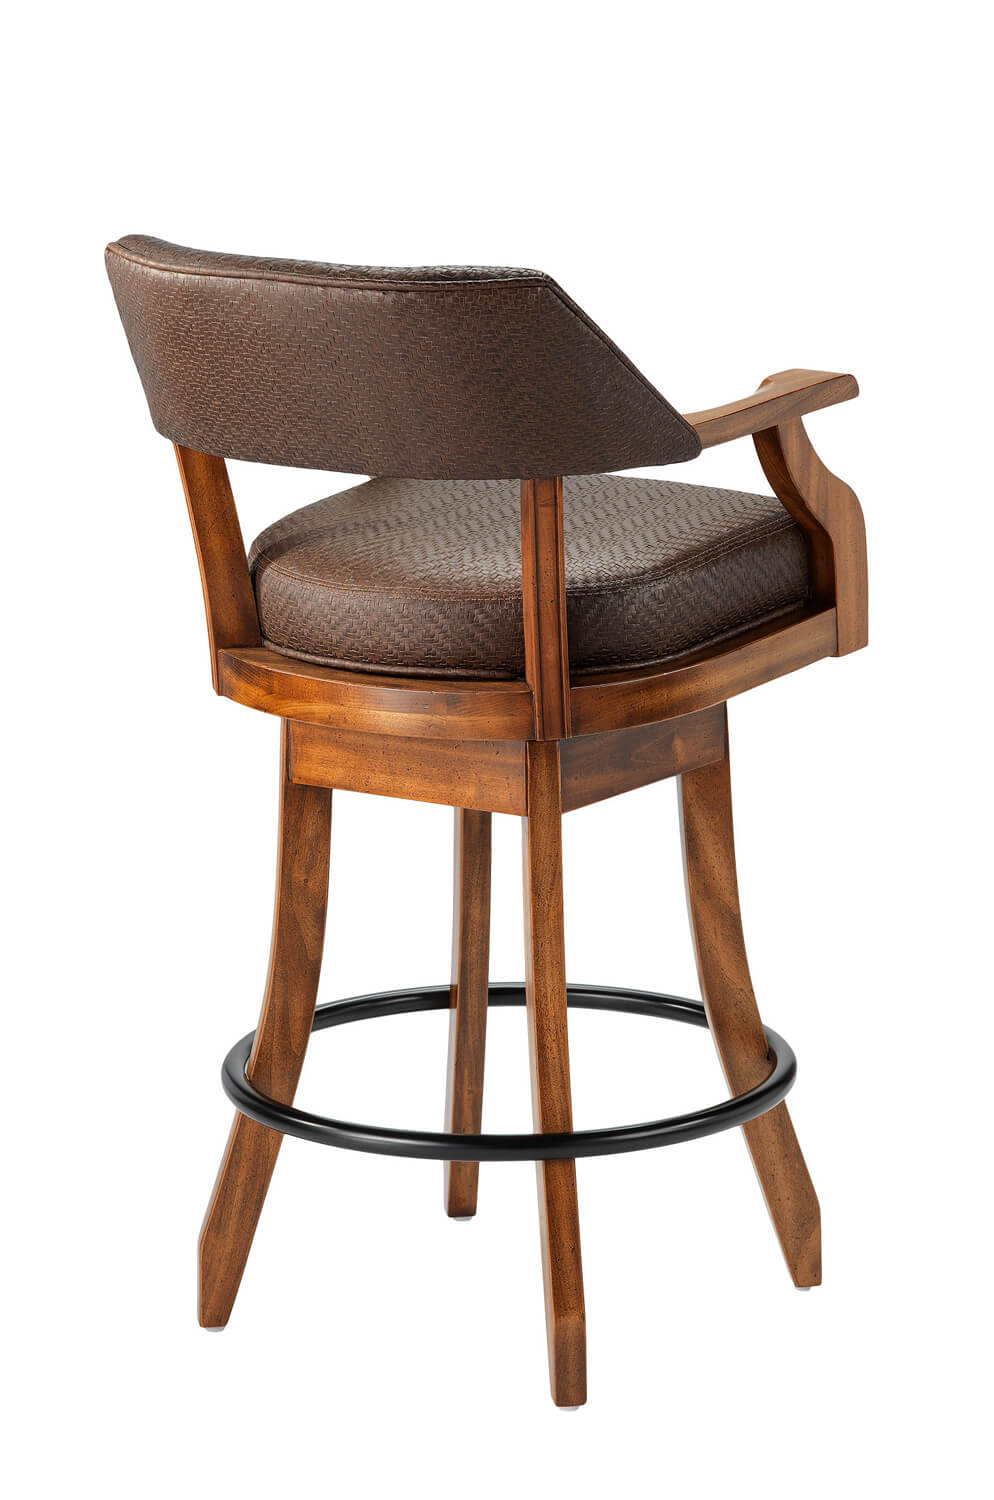 Patriot Maple Wood Swivel Stool, Black Leather Swivel Bar Stools With Arms